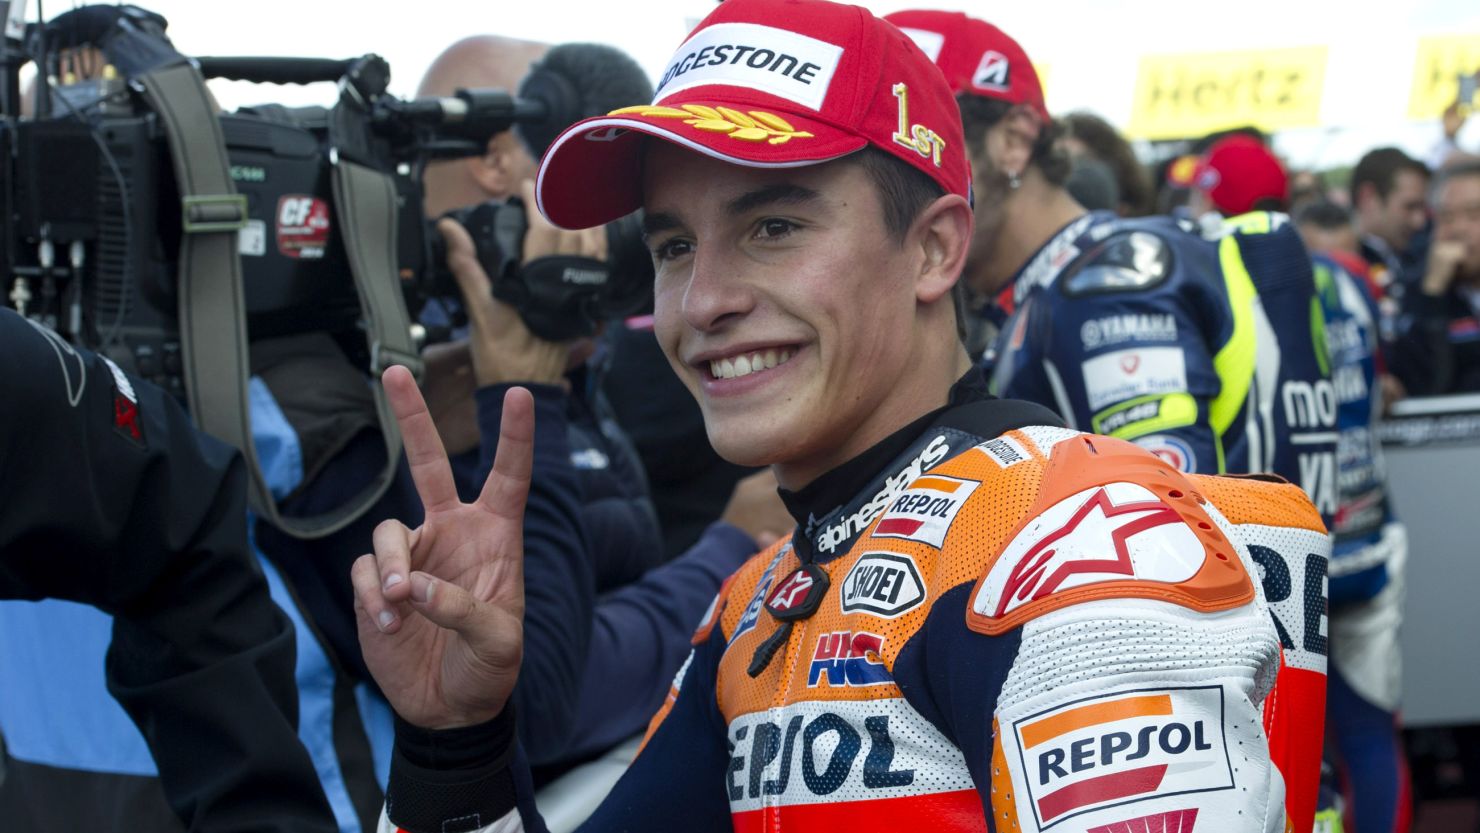 Marc Marquez bounced back after finishing fourth in the previous race in the Czech Republic.